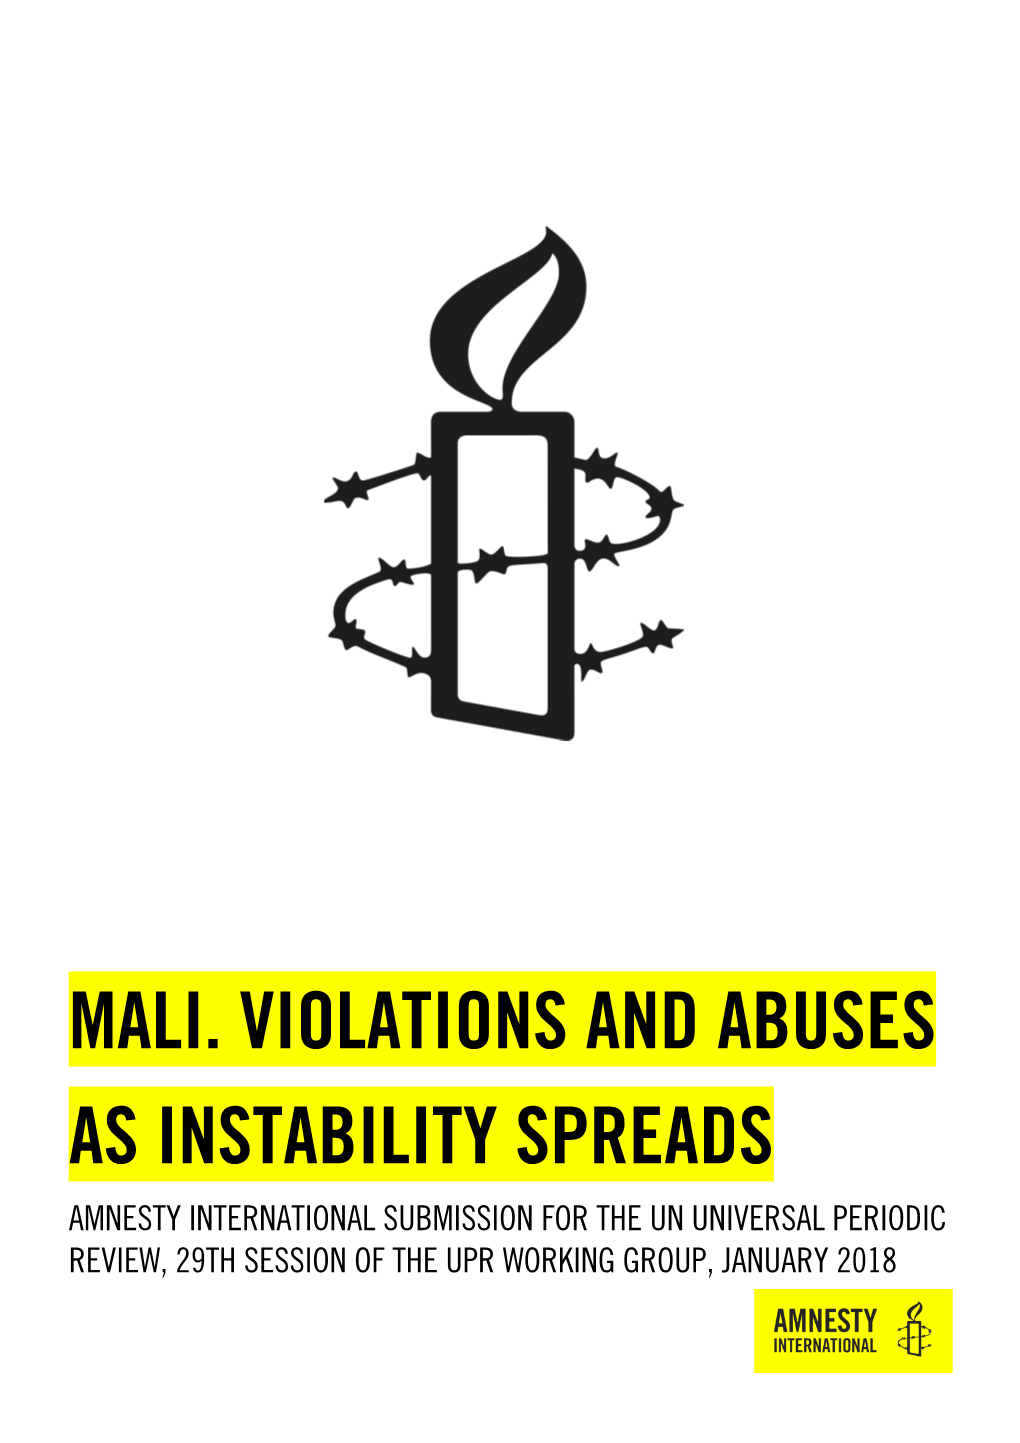 Mali. Violations and Abuses As Instability Spreads